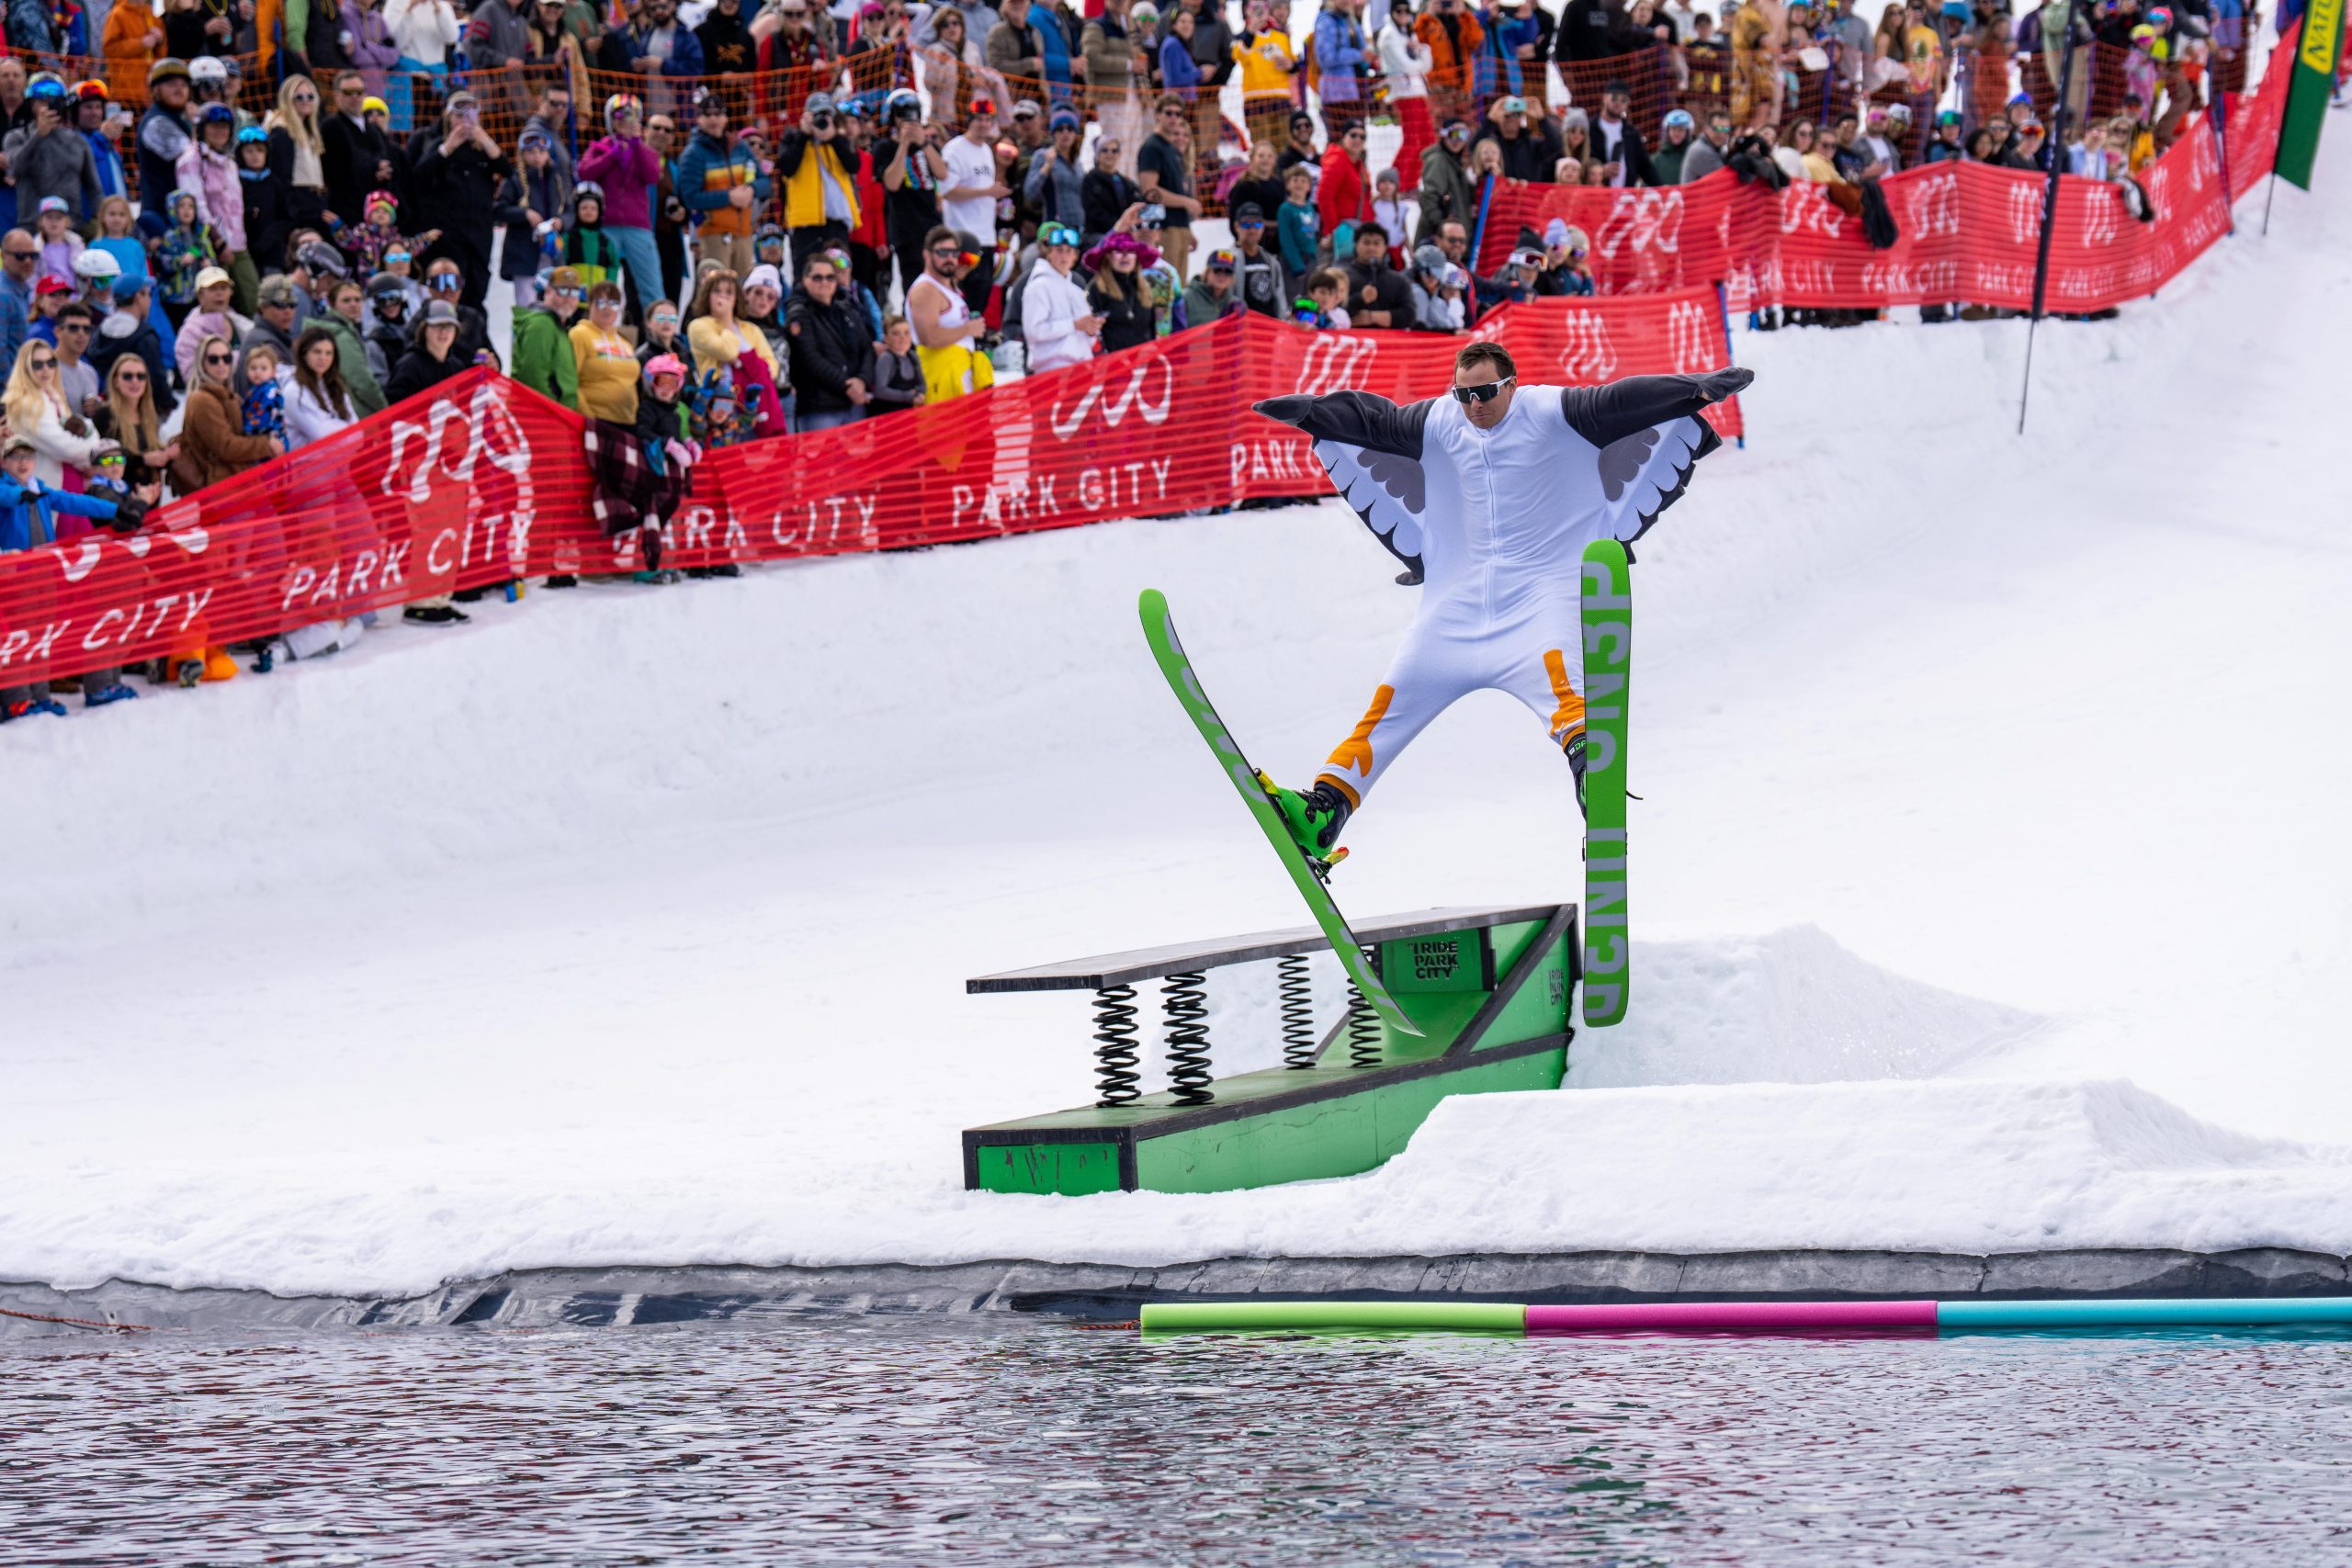 Park City Mountain celebrates spring with 2nd Annual Eagle Super Pond Championship.